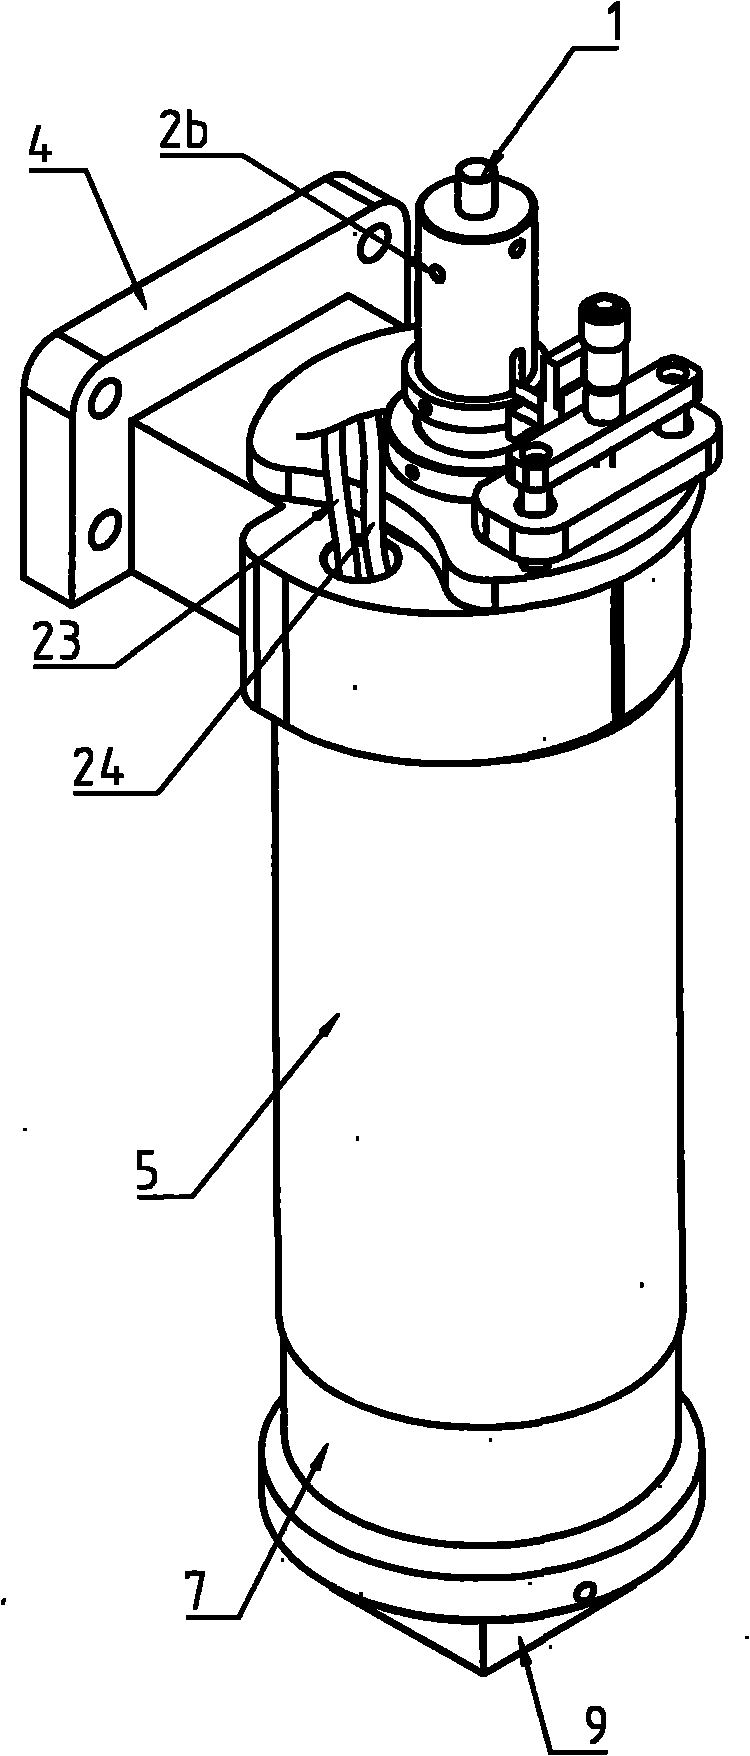 Dismounting-welding integrated hot air head